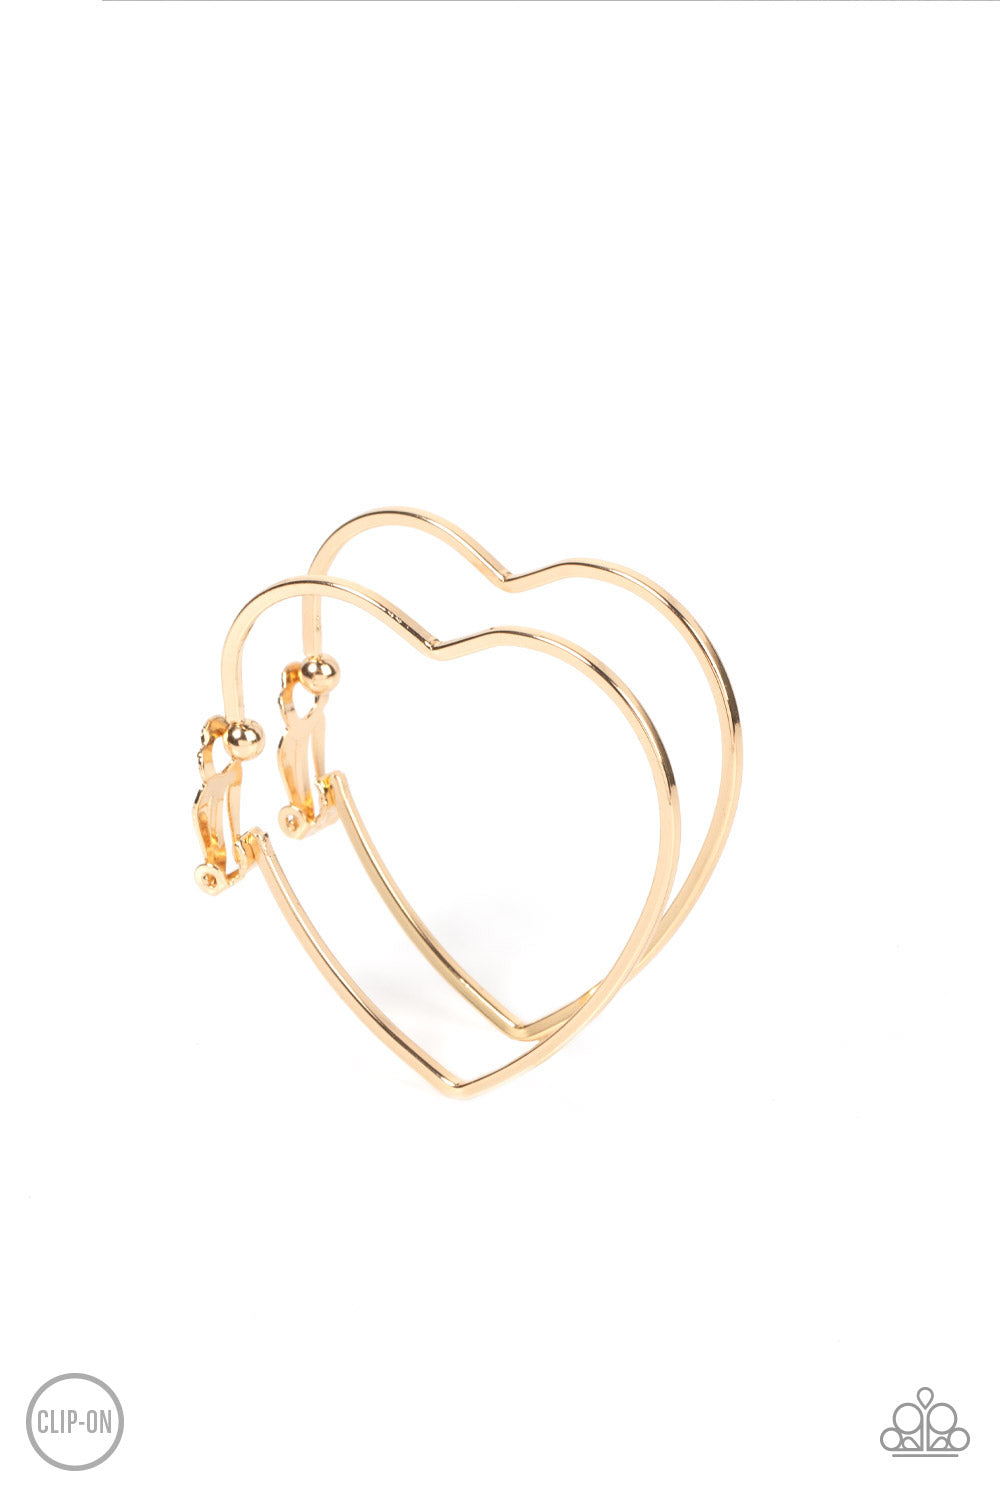 Harmonious Hearts Gold Clip-On Hoop Earring - Paparazzi Accessories  A glistening gold bar delicately curves into an oversized heart frame, resulting in a heart-stopping shimmer. Earring attaches to a standard clip-on fitting.  Sold as one pair of clip-on earrings.